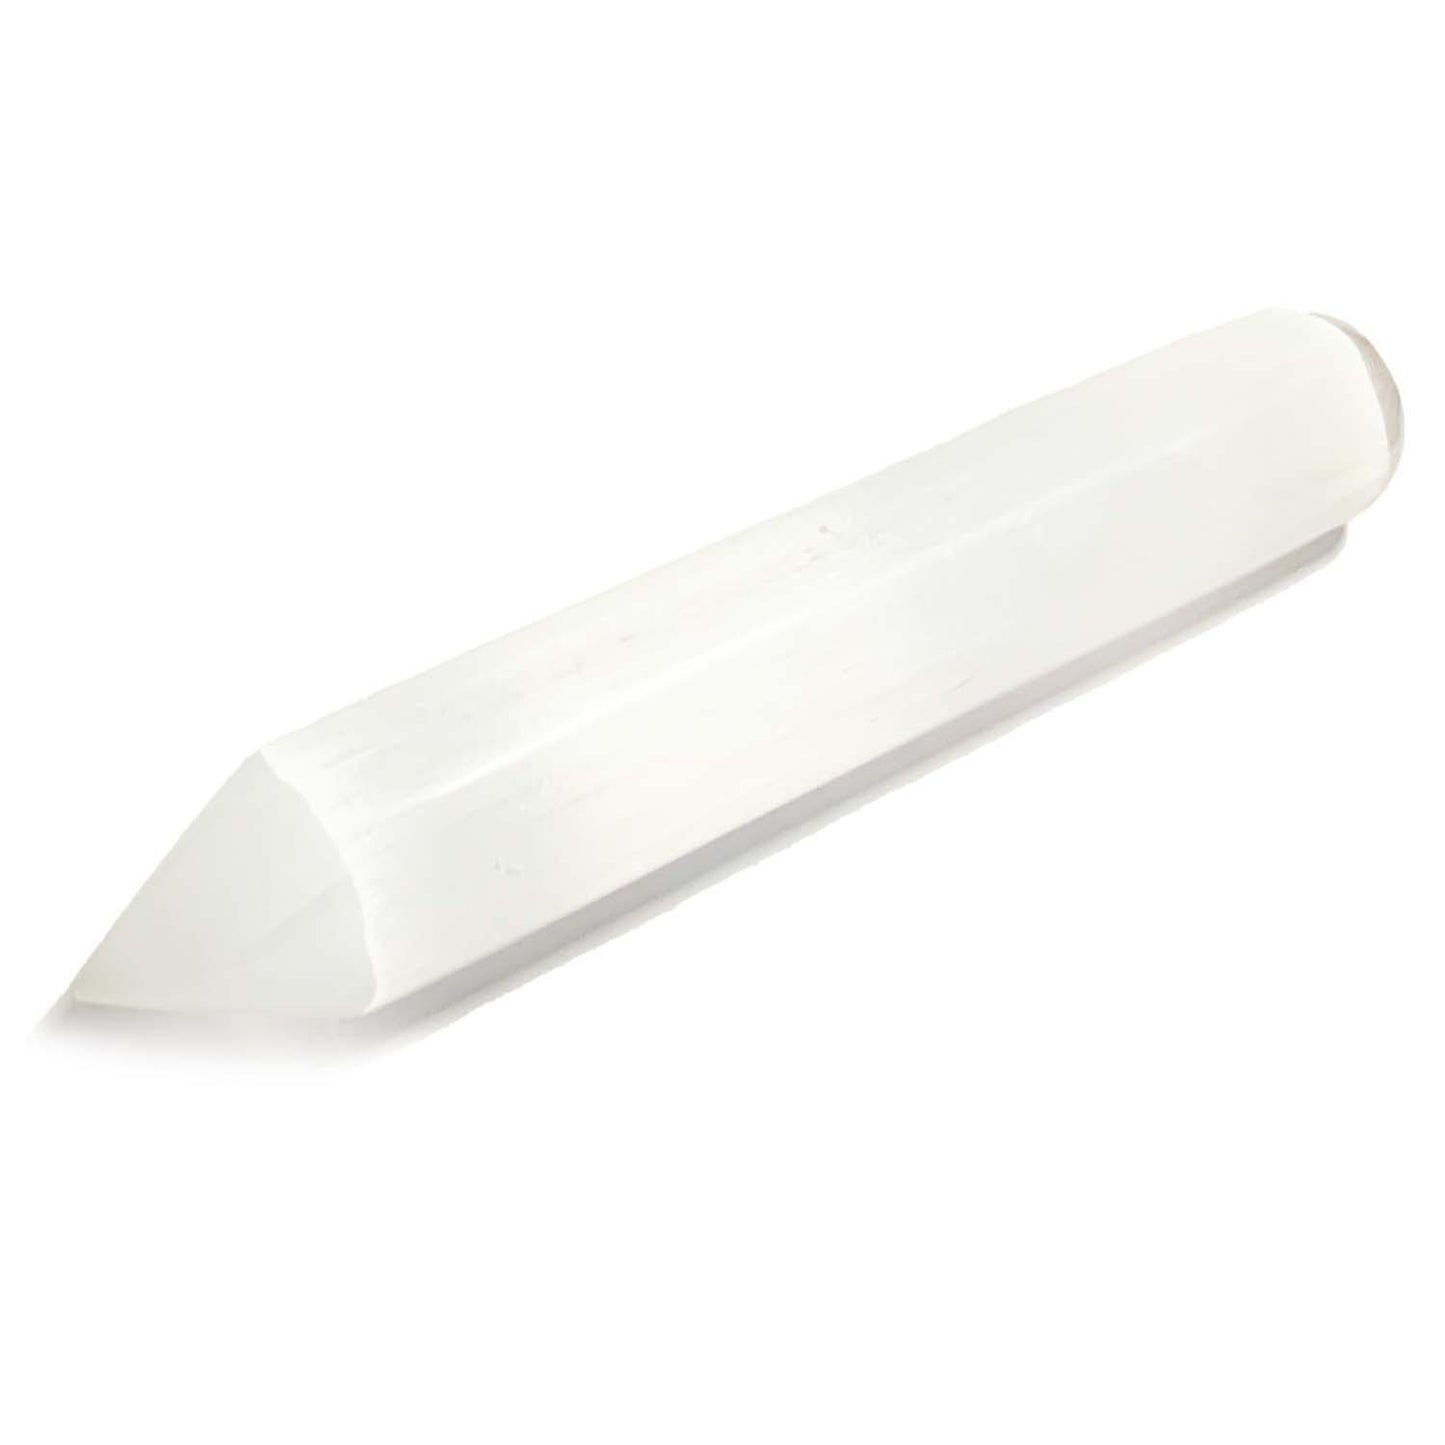 Buy Selenite Smooth Pencil Wand | Energy Clearing & Spiritual Practise - Selenite has a gentle and fine vibration is often associated with opening up the crown chakra and also accessing angelic consciousness. Some people use selenite as a tool when accessing past life material or for use when meditating. Selenite Smooth Point Massage Wand ideal for combing the aura. at Sacred Remedy Online